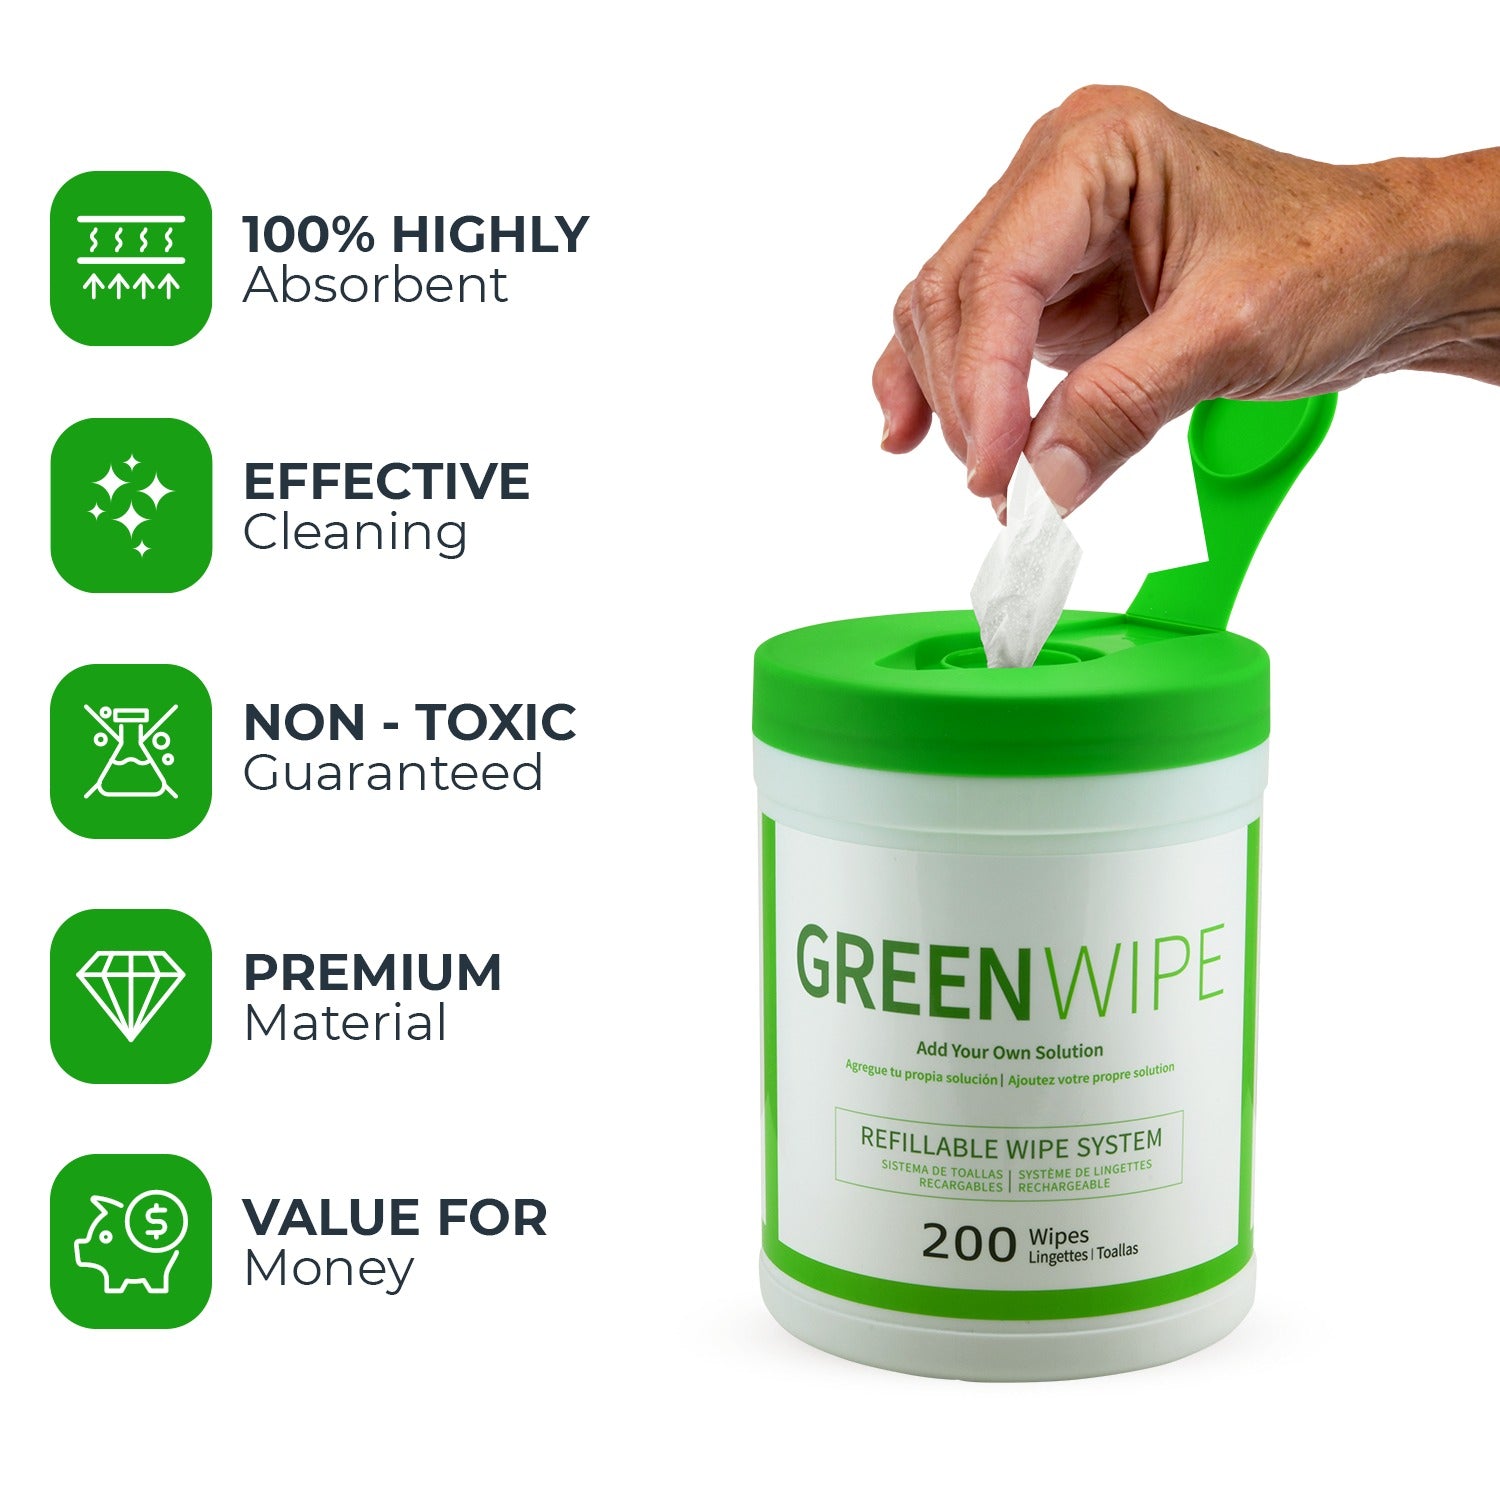 GreenWipe| DRY Wipe System for Solvents 5